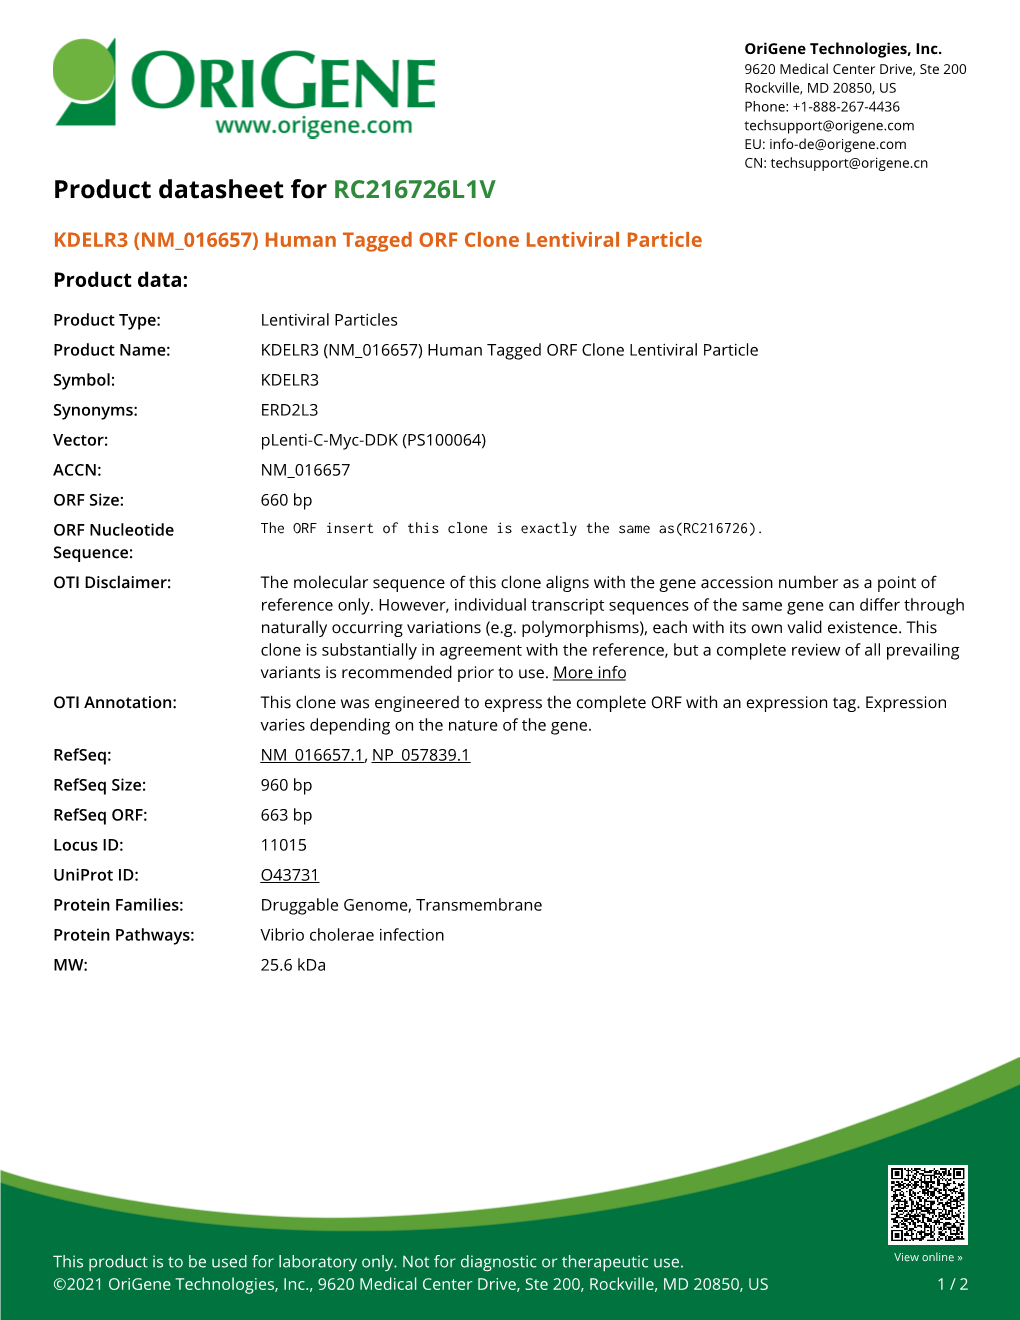 KDELR3 (NM 016657) Human Tagged ORF Clone Lentiviral Particle Product Data